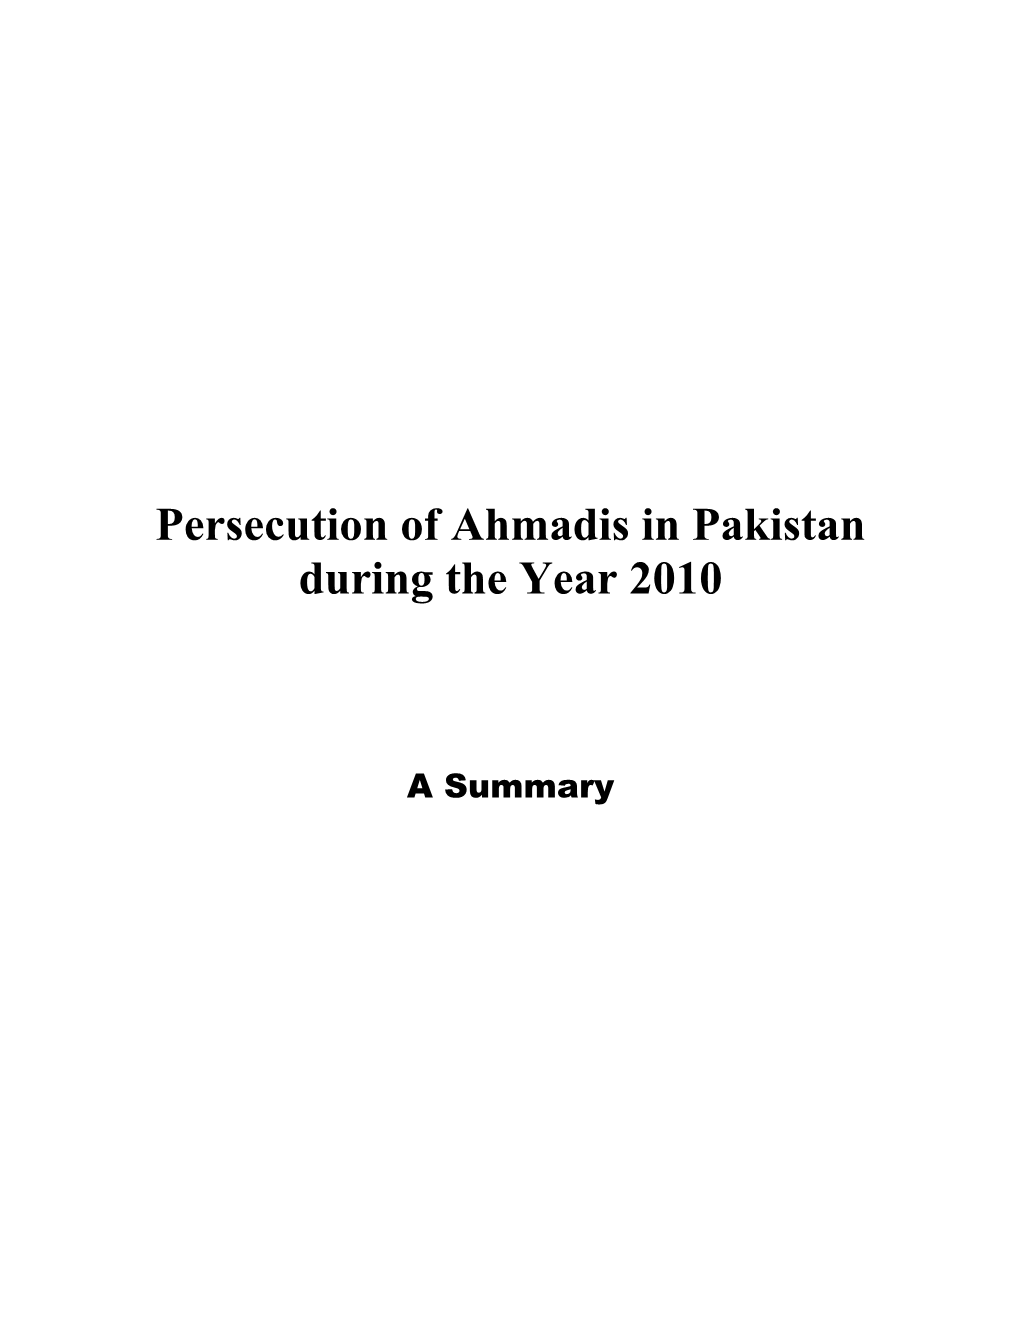 Persecution of Ahmadis in Pakistan During the Year 2010